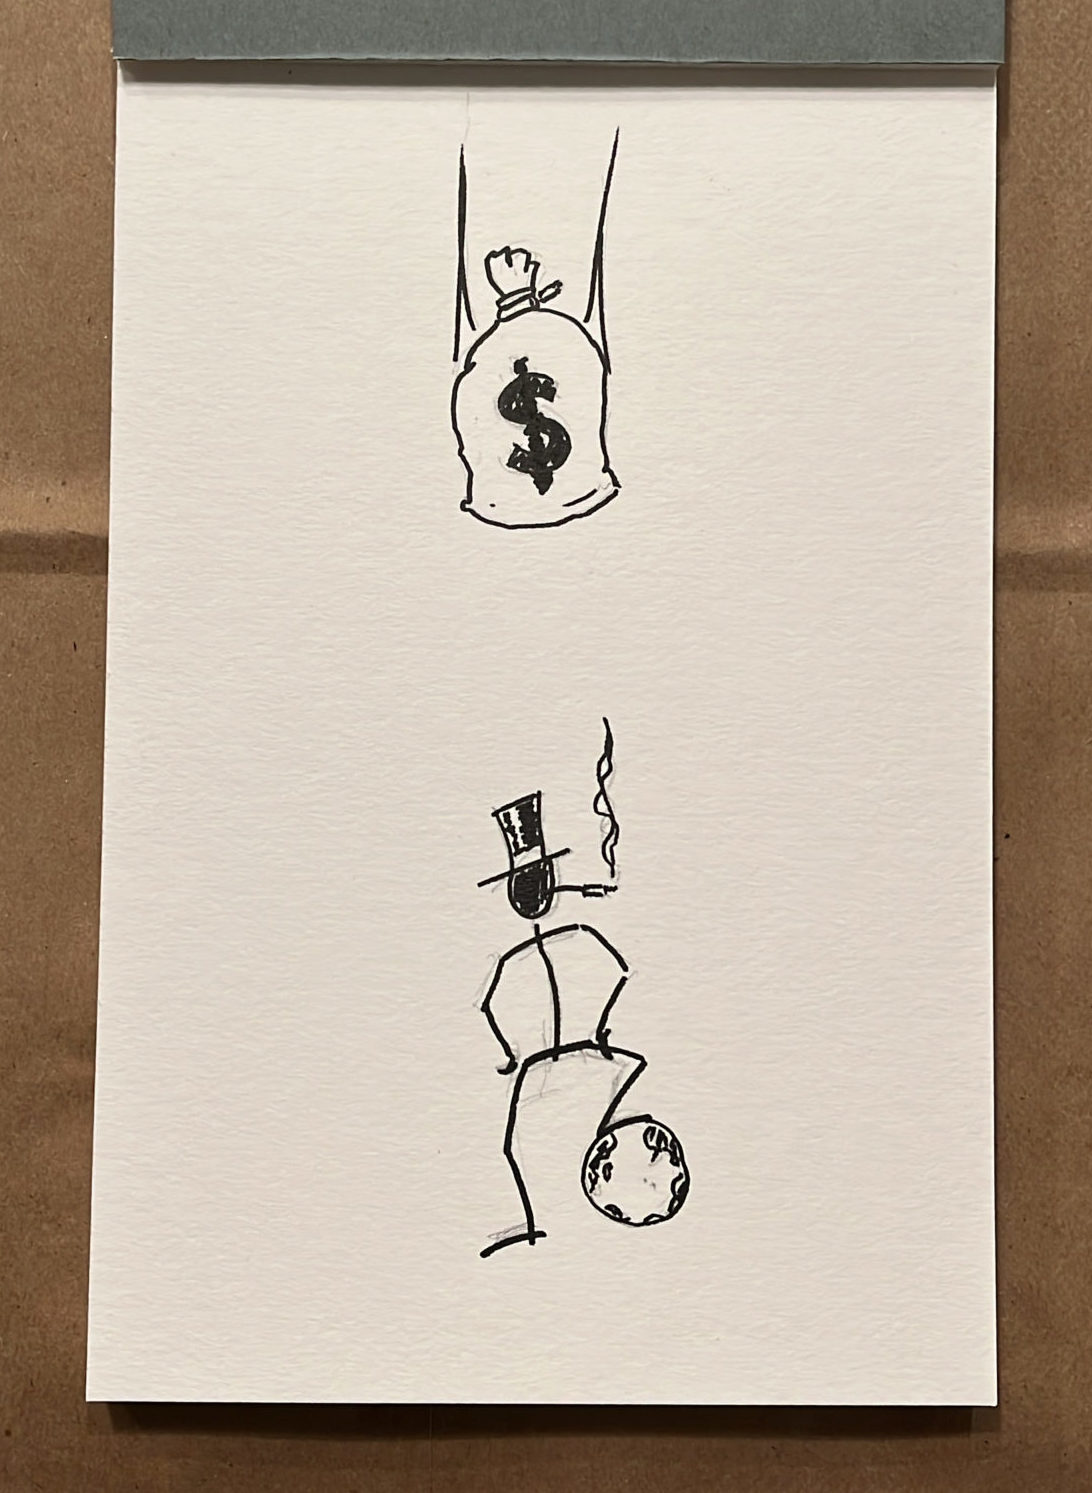 An ink drawing of a stick figure wearing a top hat and smoking with a long cigarette holder while jauntily standing with one foot on a globe. A giant sack of money is falling directly towards the figure.